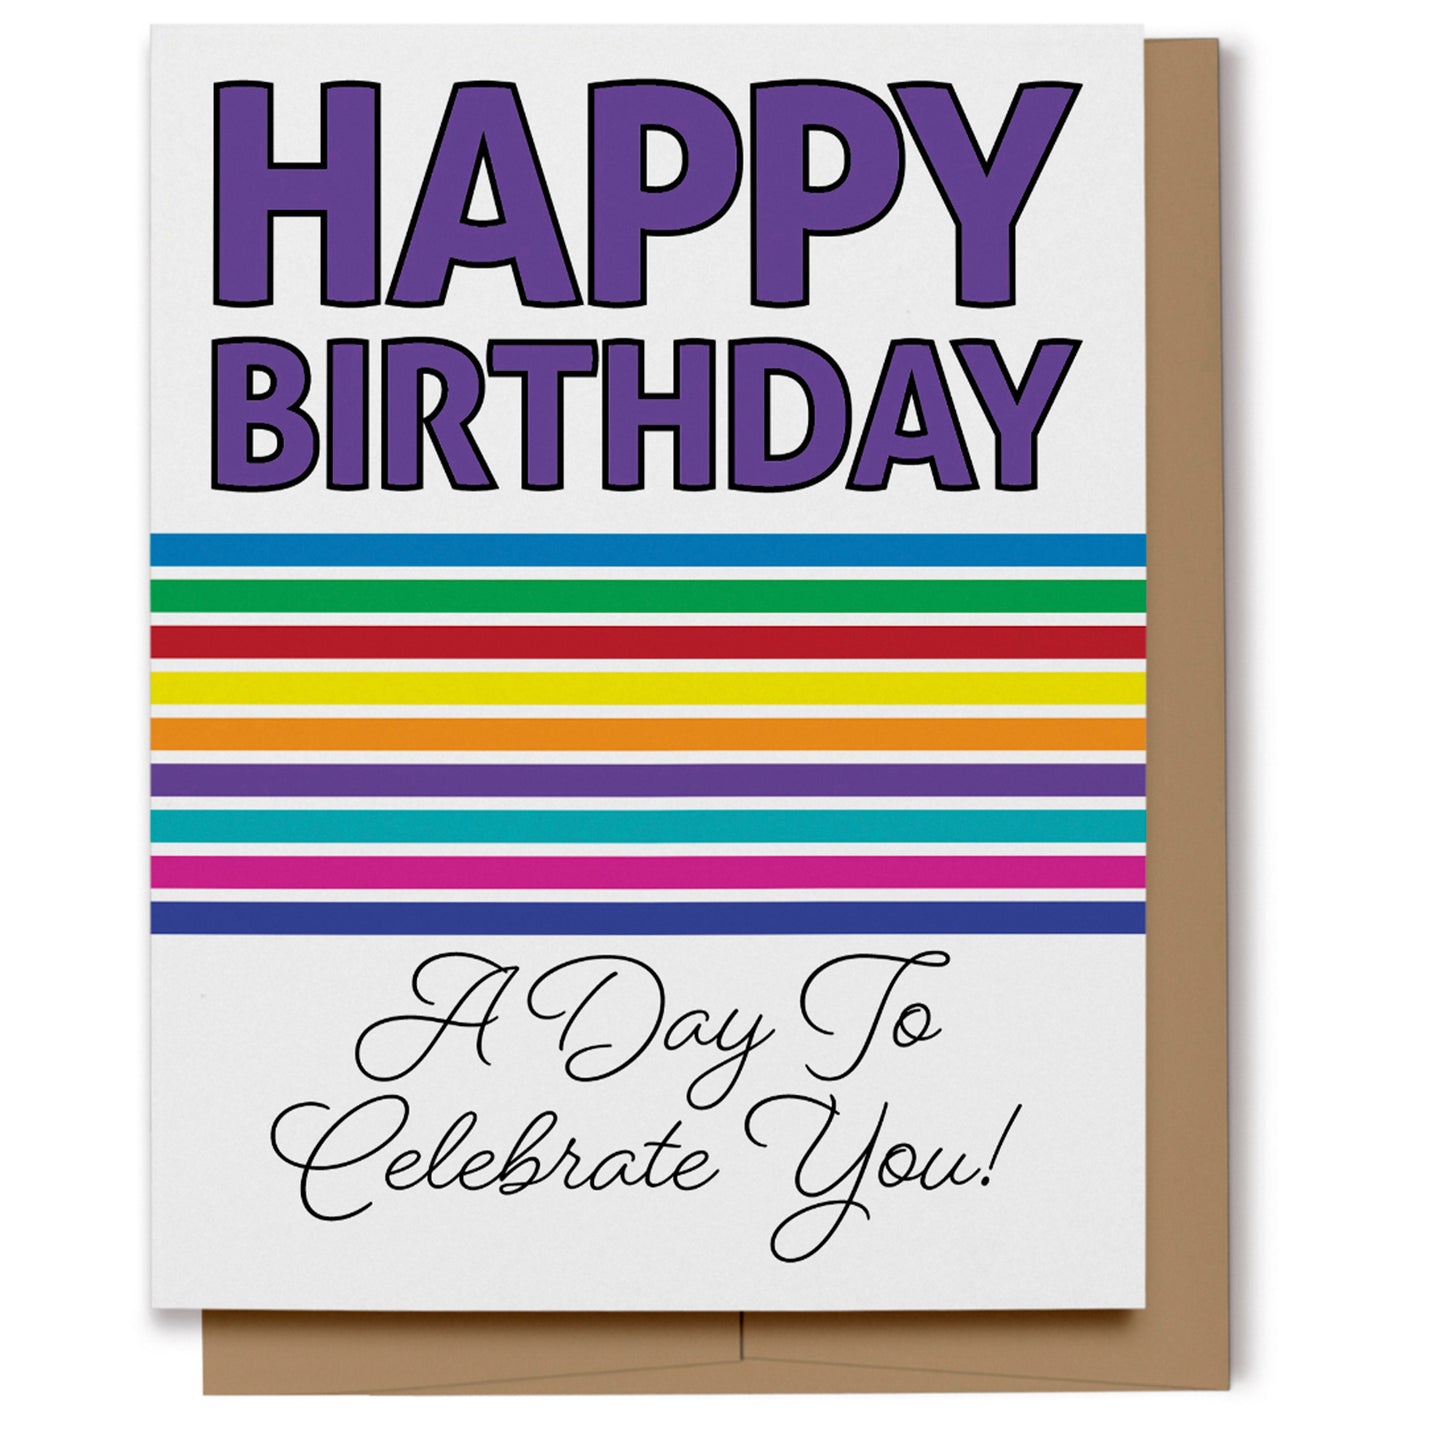 Bold Rainbow Happy Birthday Card has big bold purple letters at the top saying "Happy Birthday" with rainbow-colored stripes beneath and scripted text that reads, "A Day To Celebrate You!"